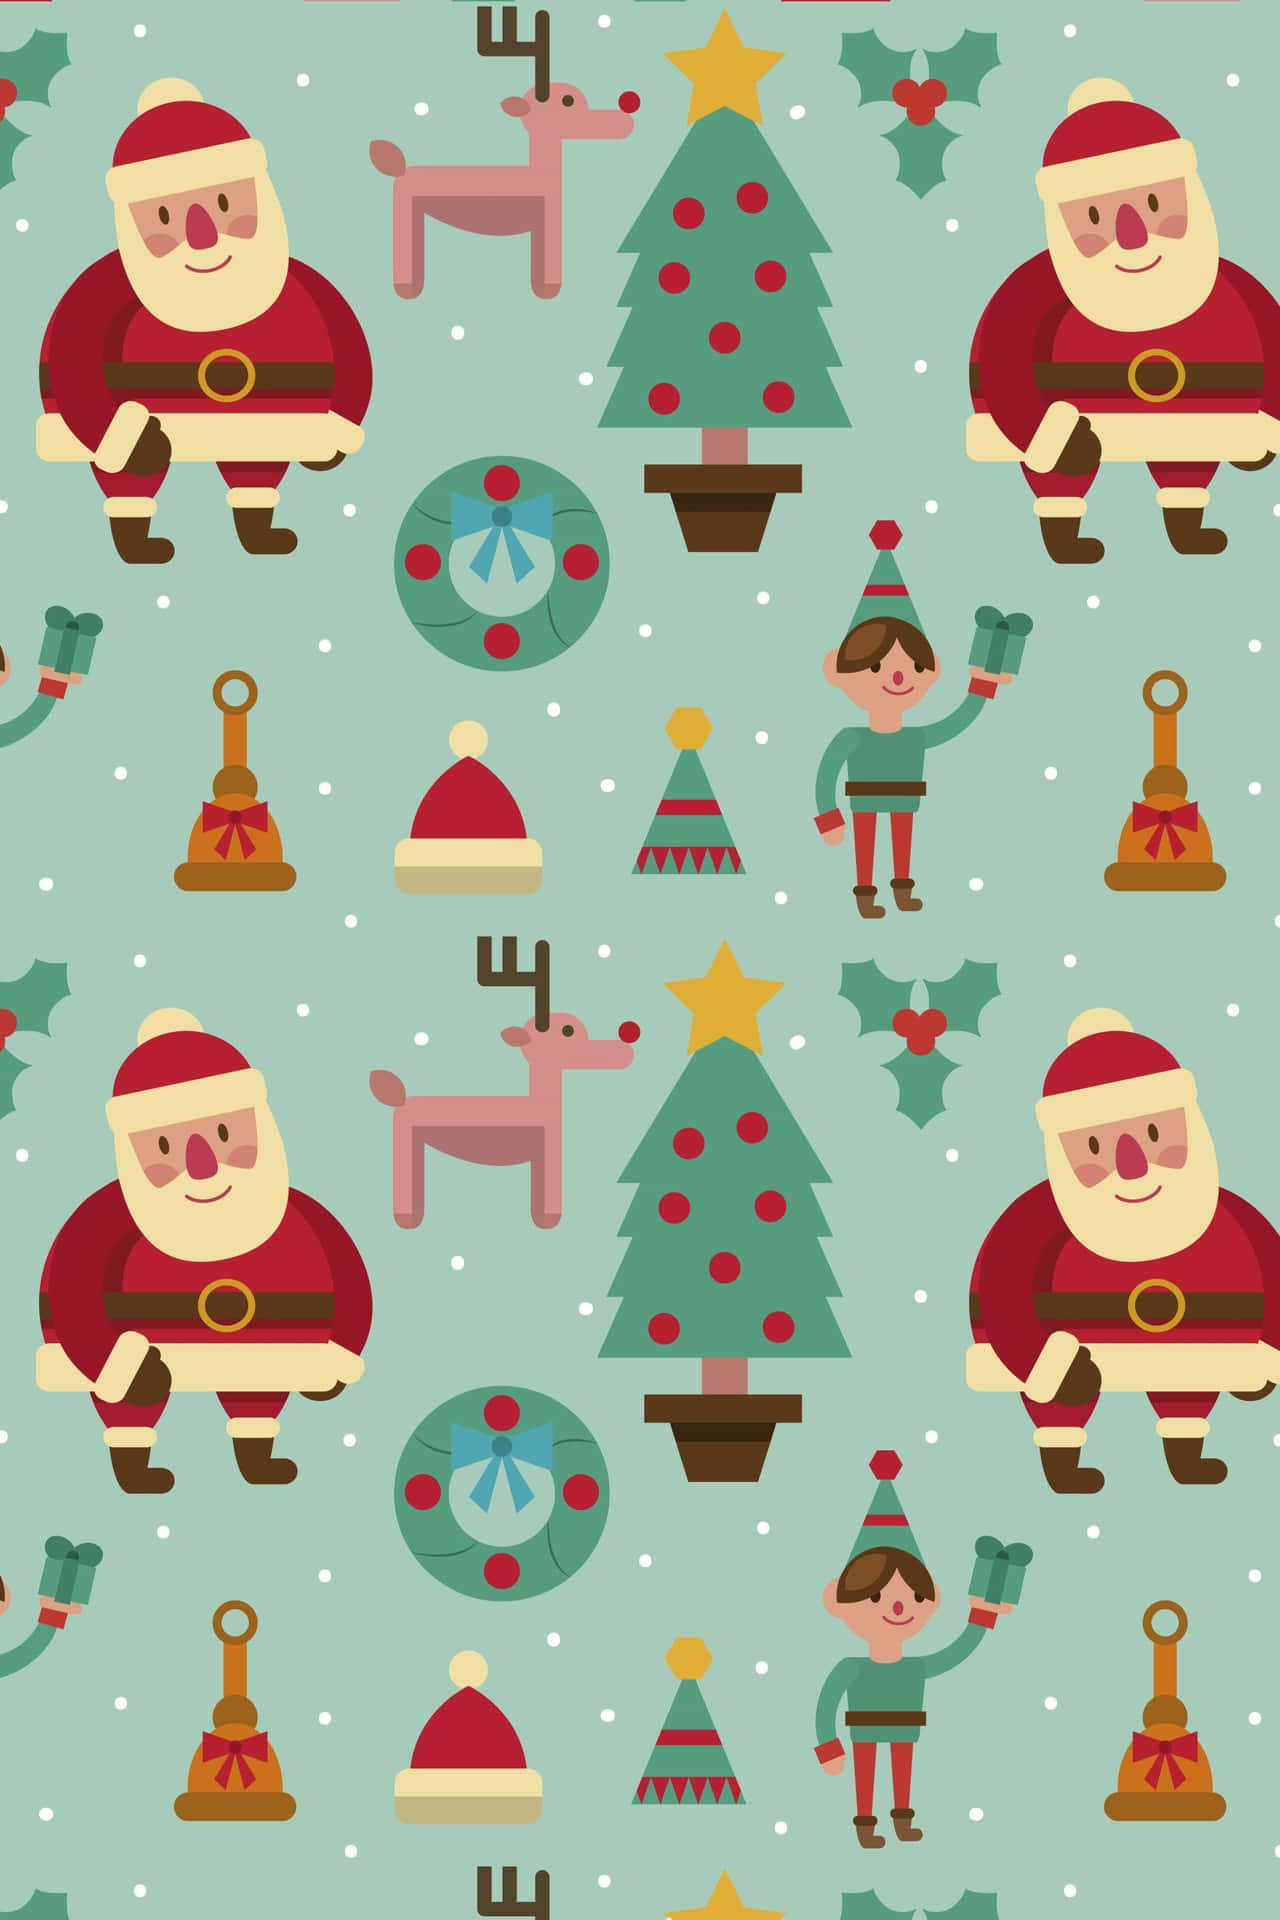 Nothing says Christmas like a new, cute phone! Wallpaper